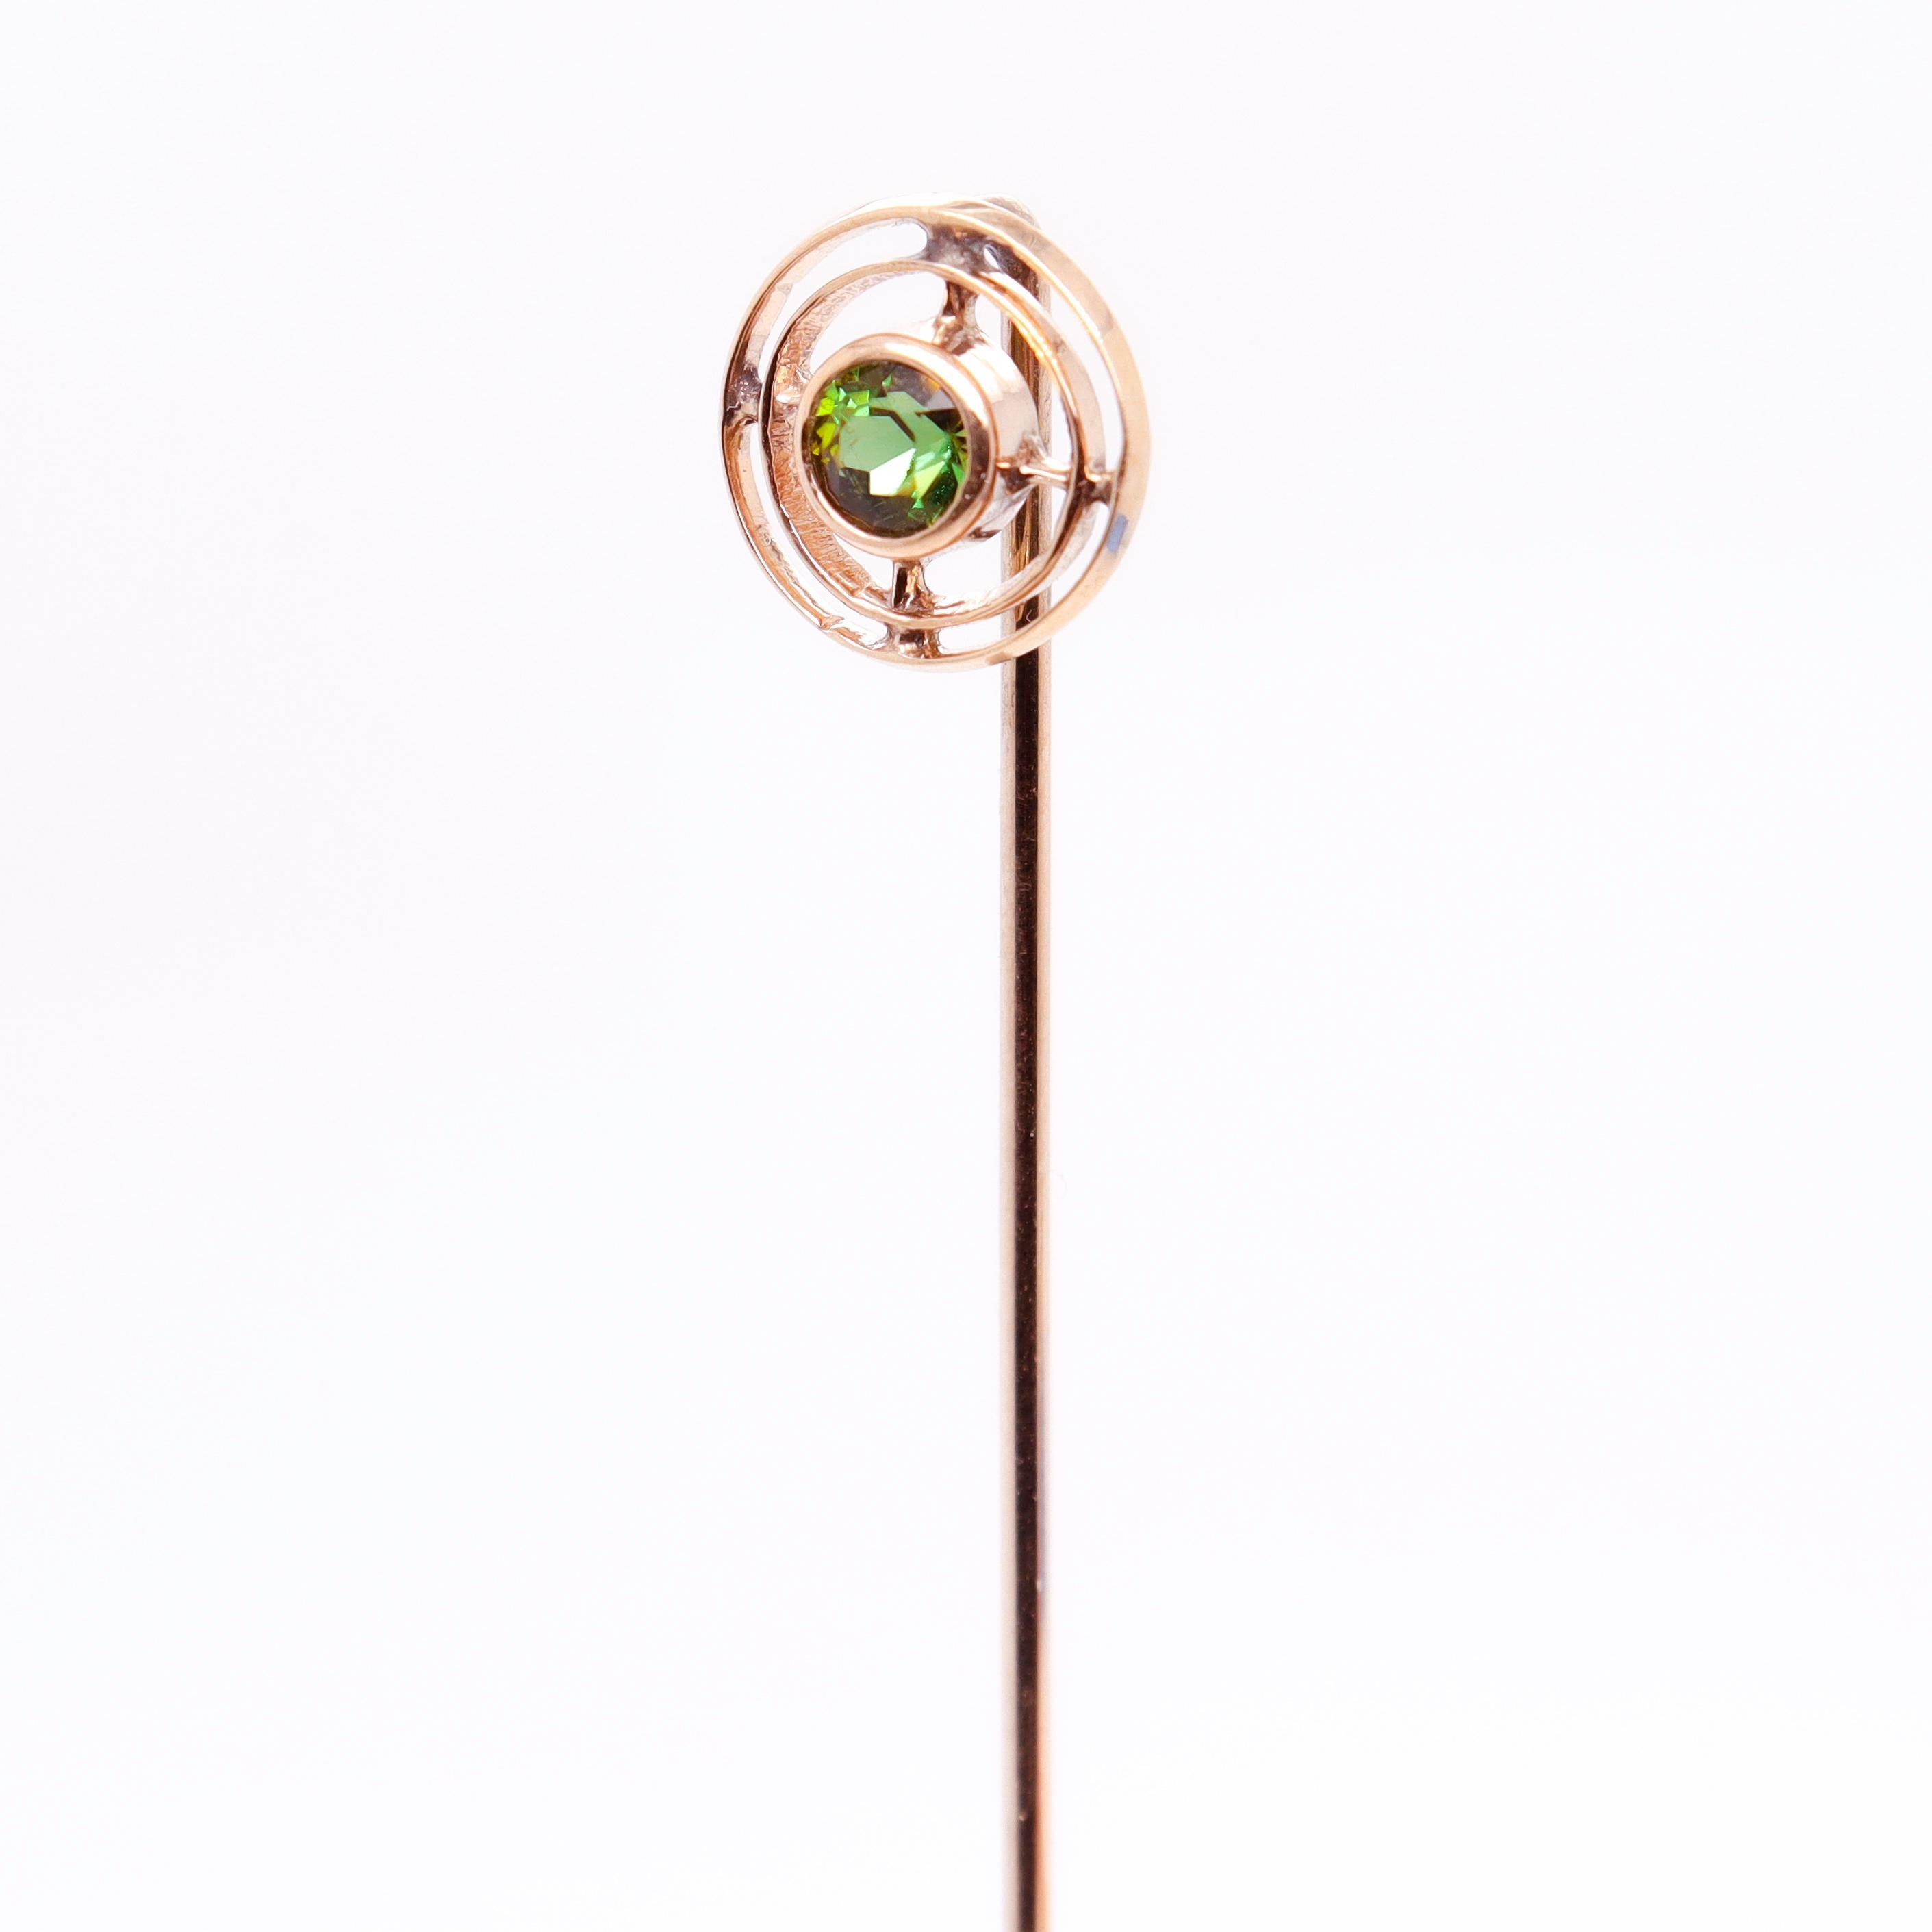 A very fine Edwardian tourmaline stickpin.

In 10k yellow gold.

With concentric gold circles surrounding a round faceted, bezel set green tourmaline gemstone.

Simply a great stickpin!

Date:
Early 20th Century

Overall Condition:
It is in overall